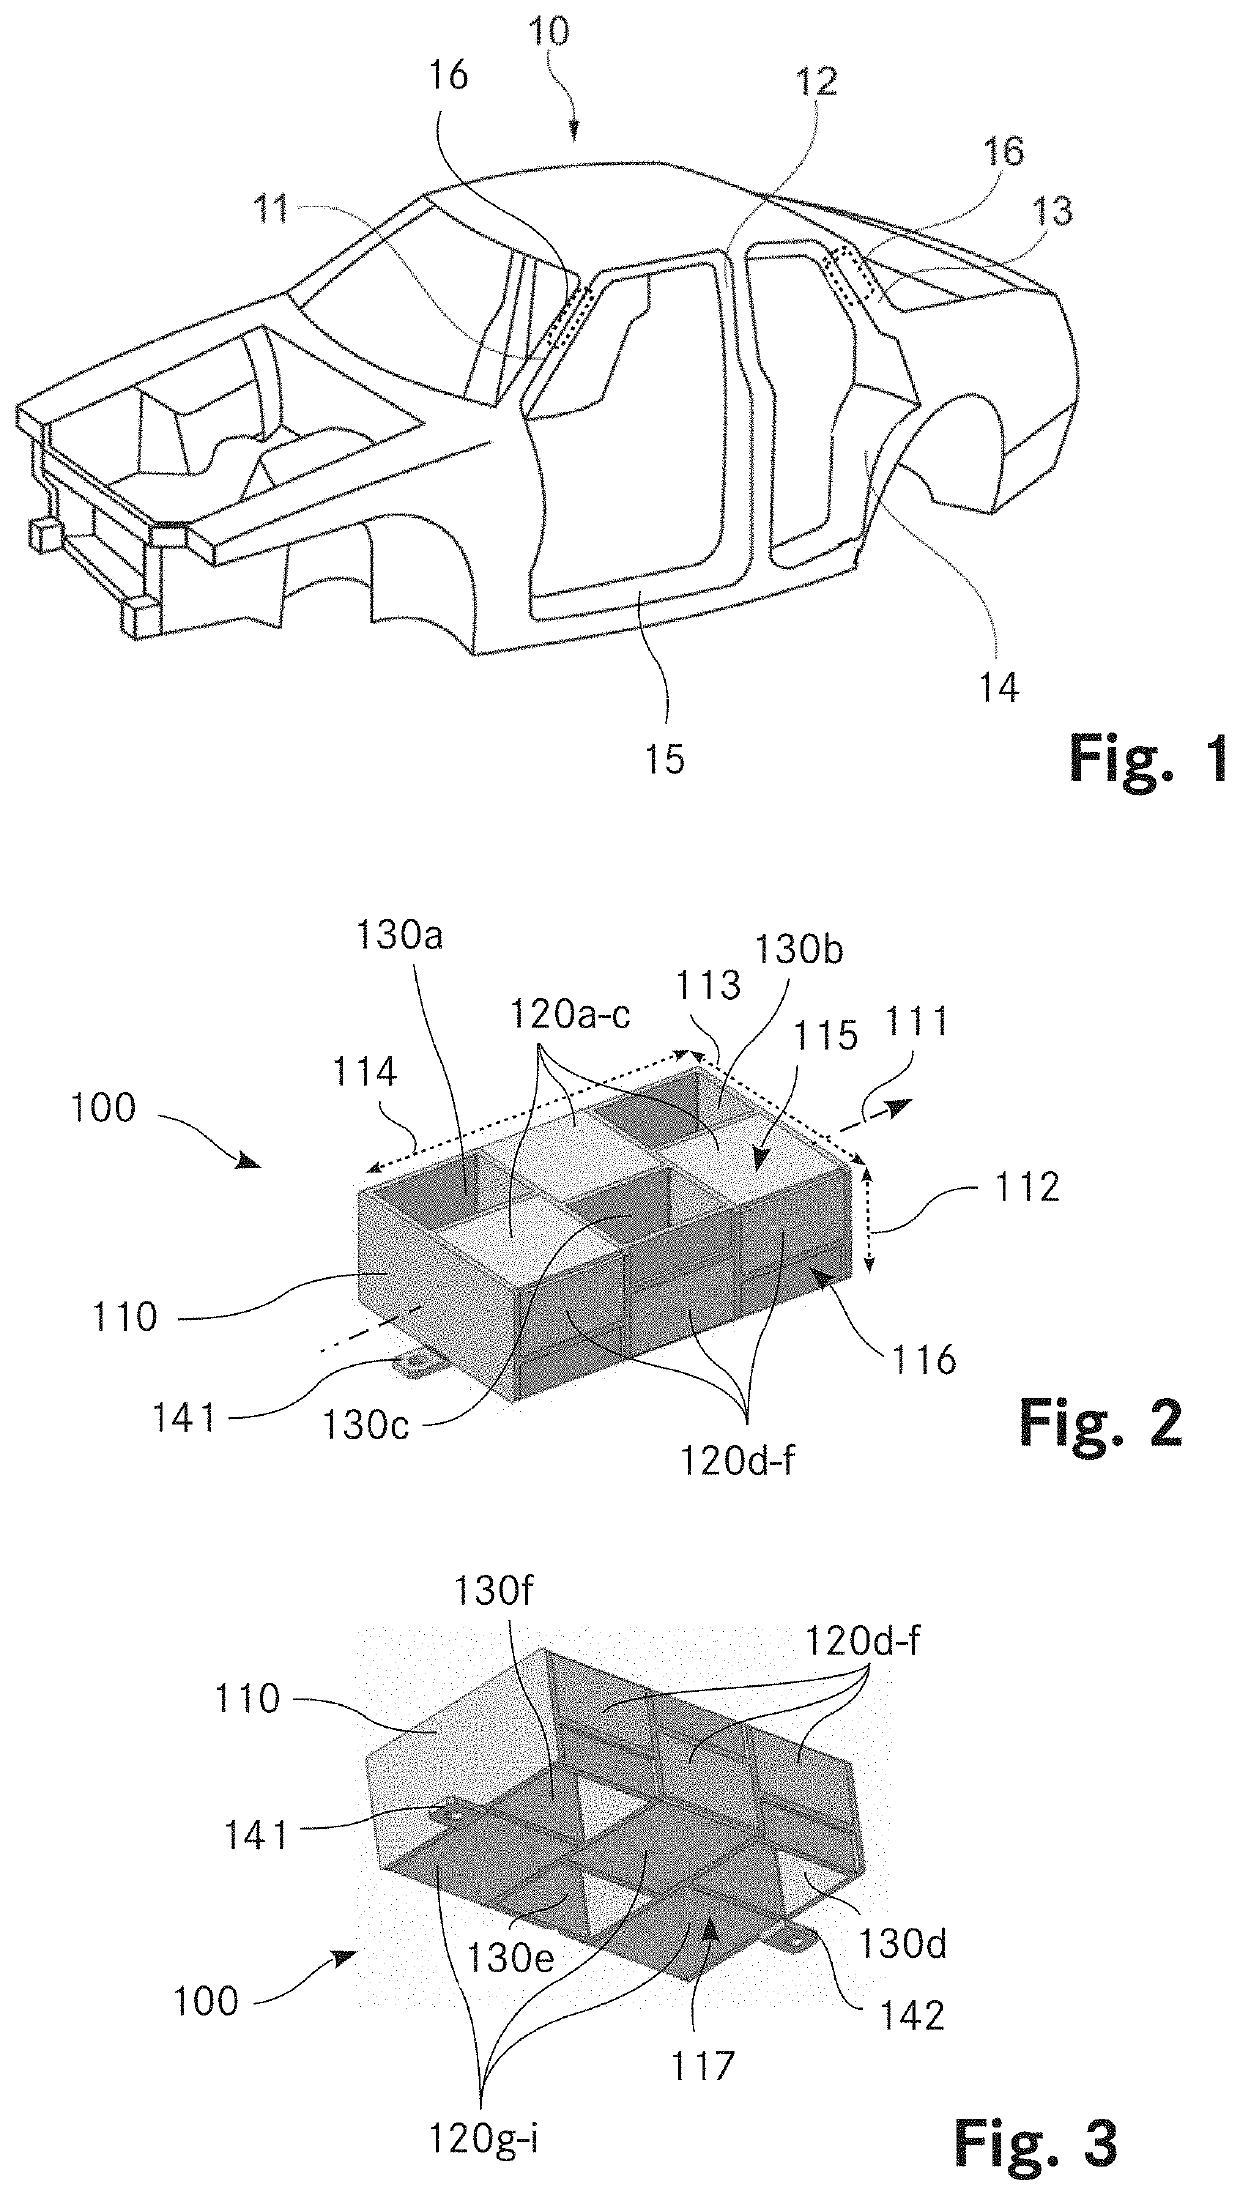 Insulating element for a structural element of a motor vehicle